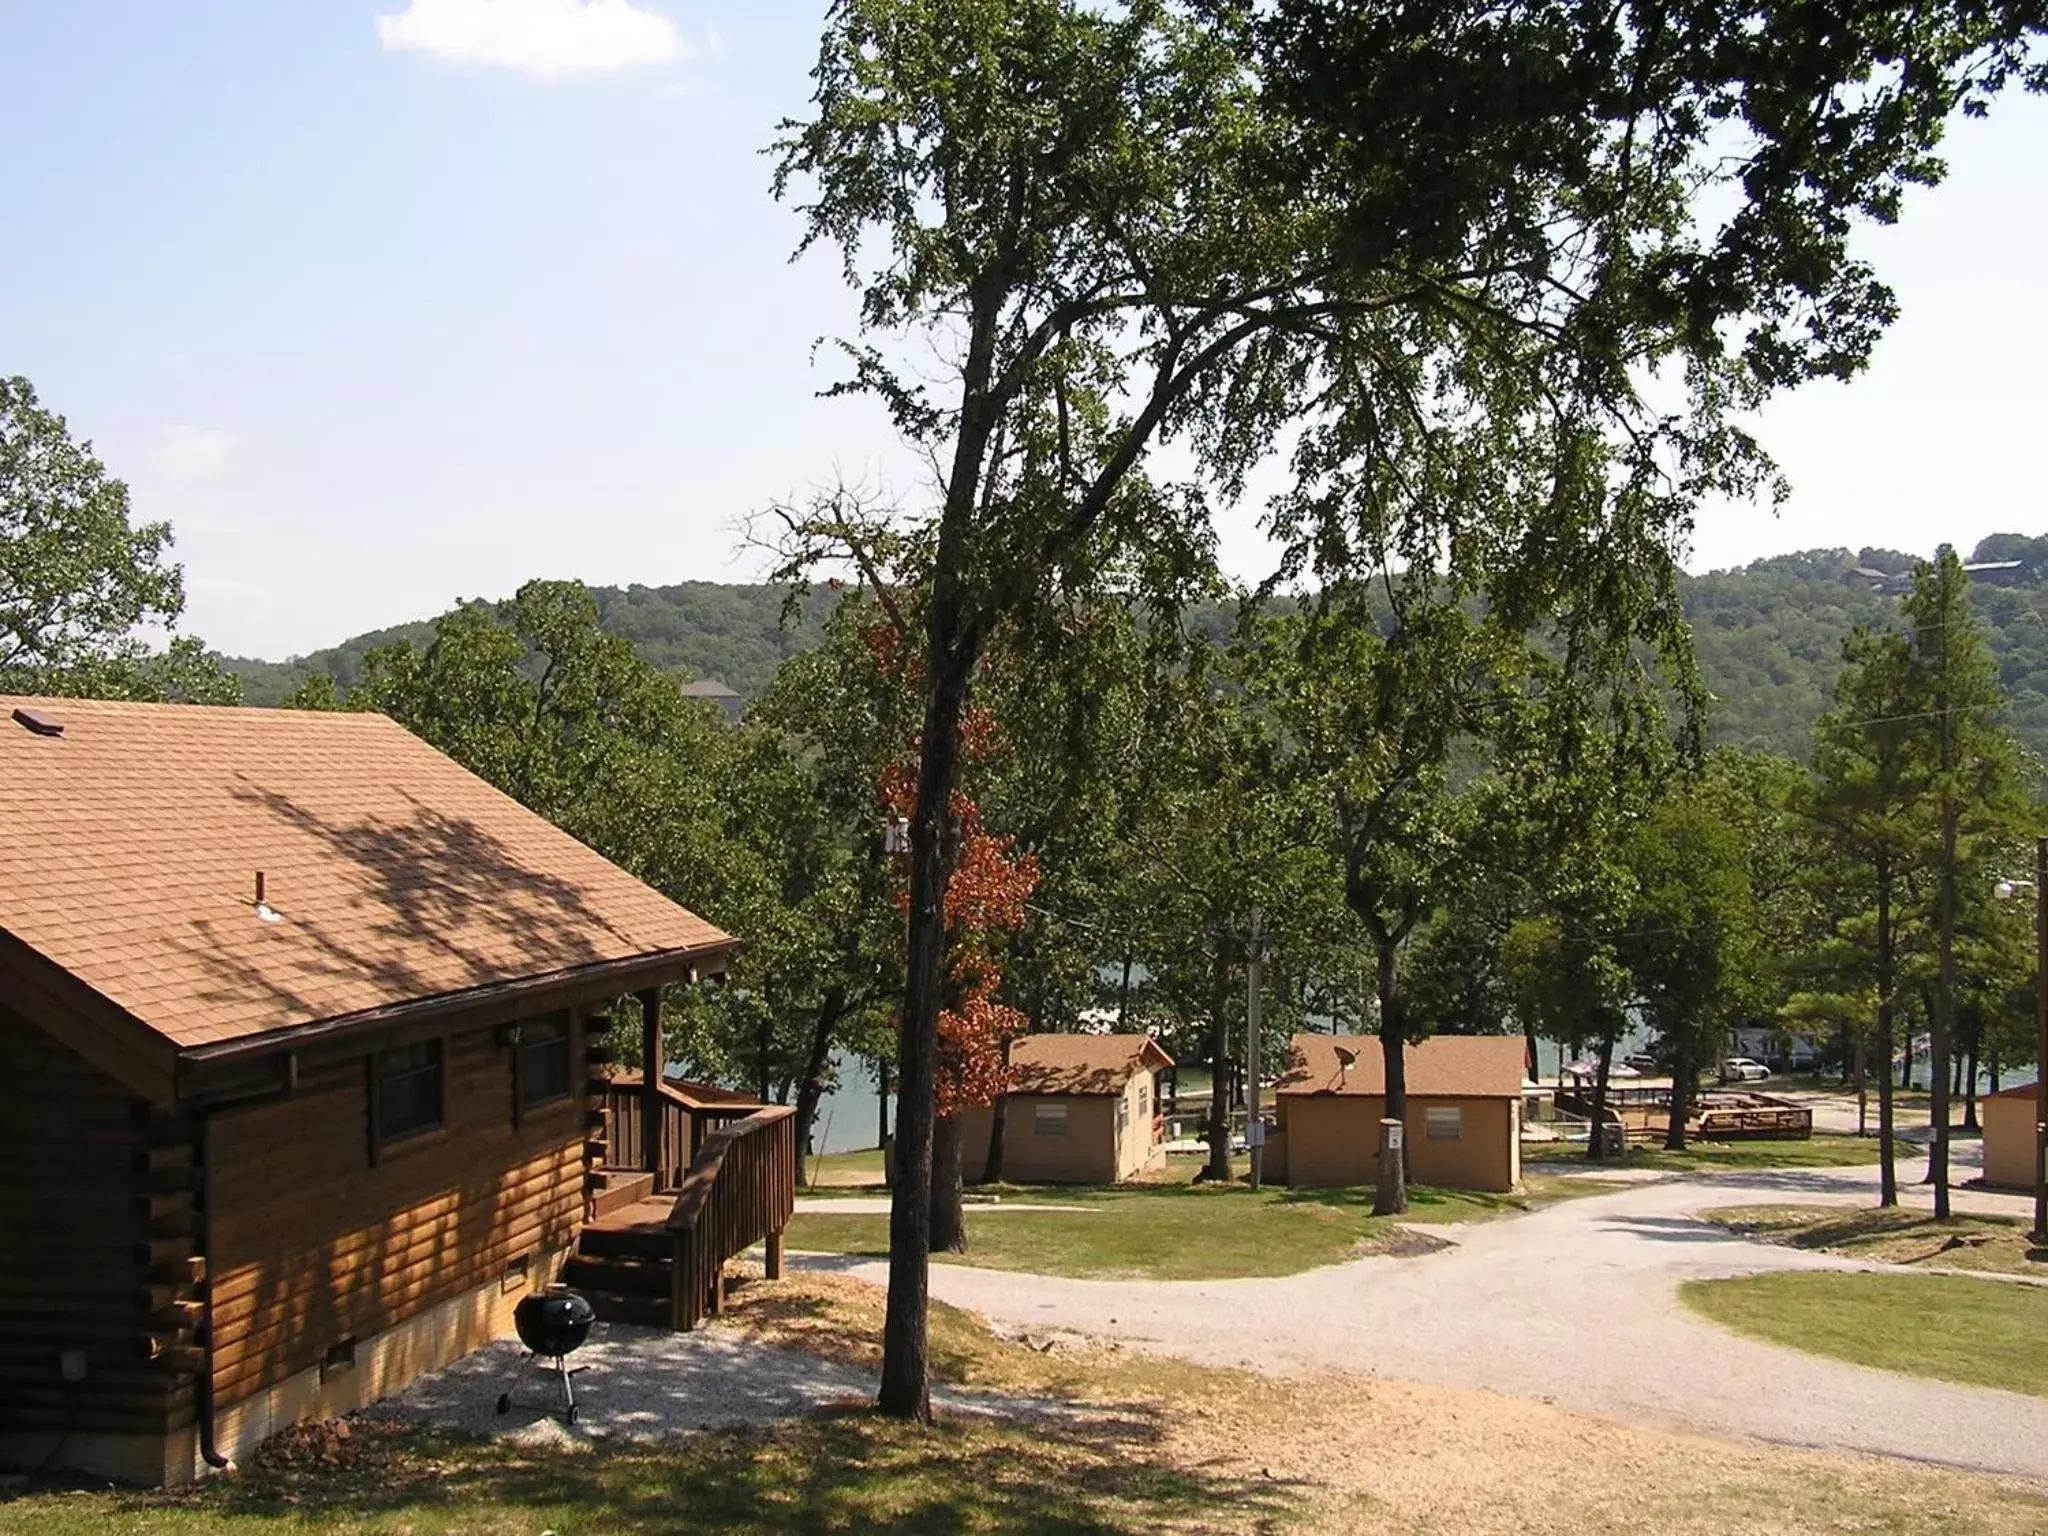 Area and facilities, Property Building in Mill Creek Resort on Table Rock Lake